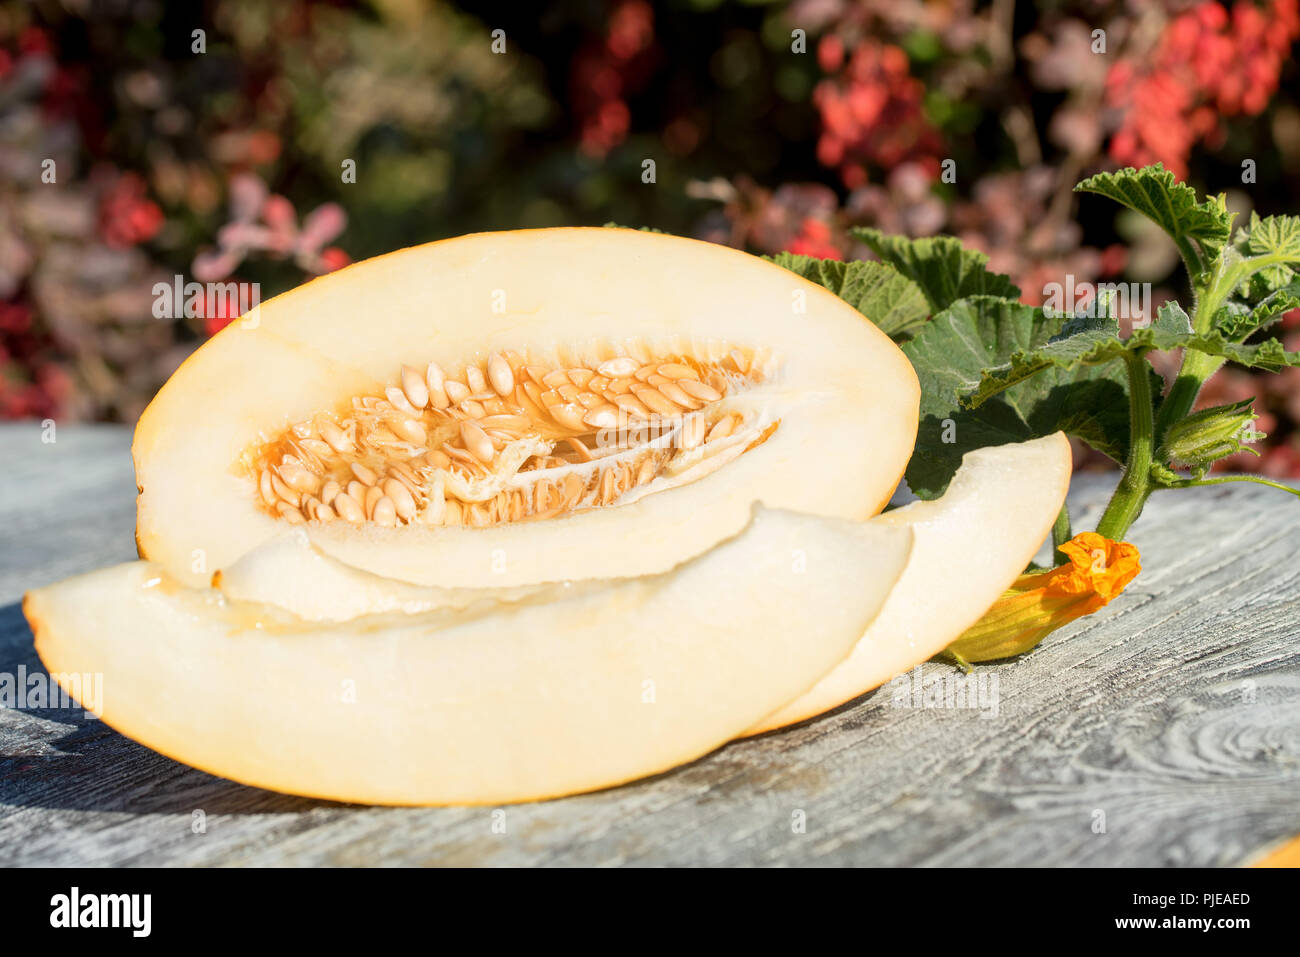 Sliced melon on wooden table outdoors Stock Photo